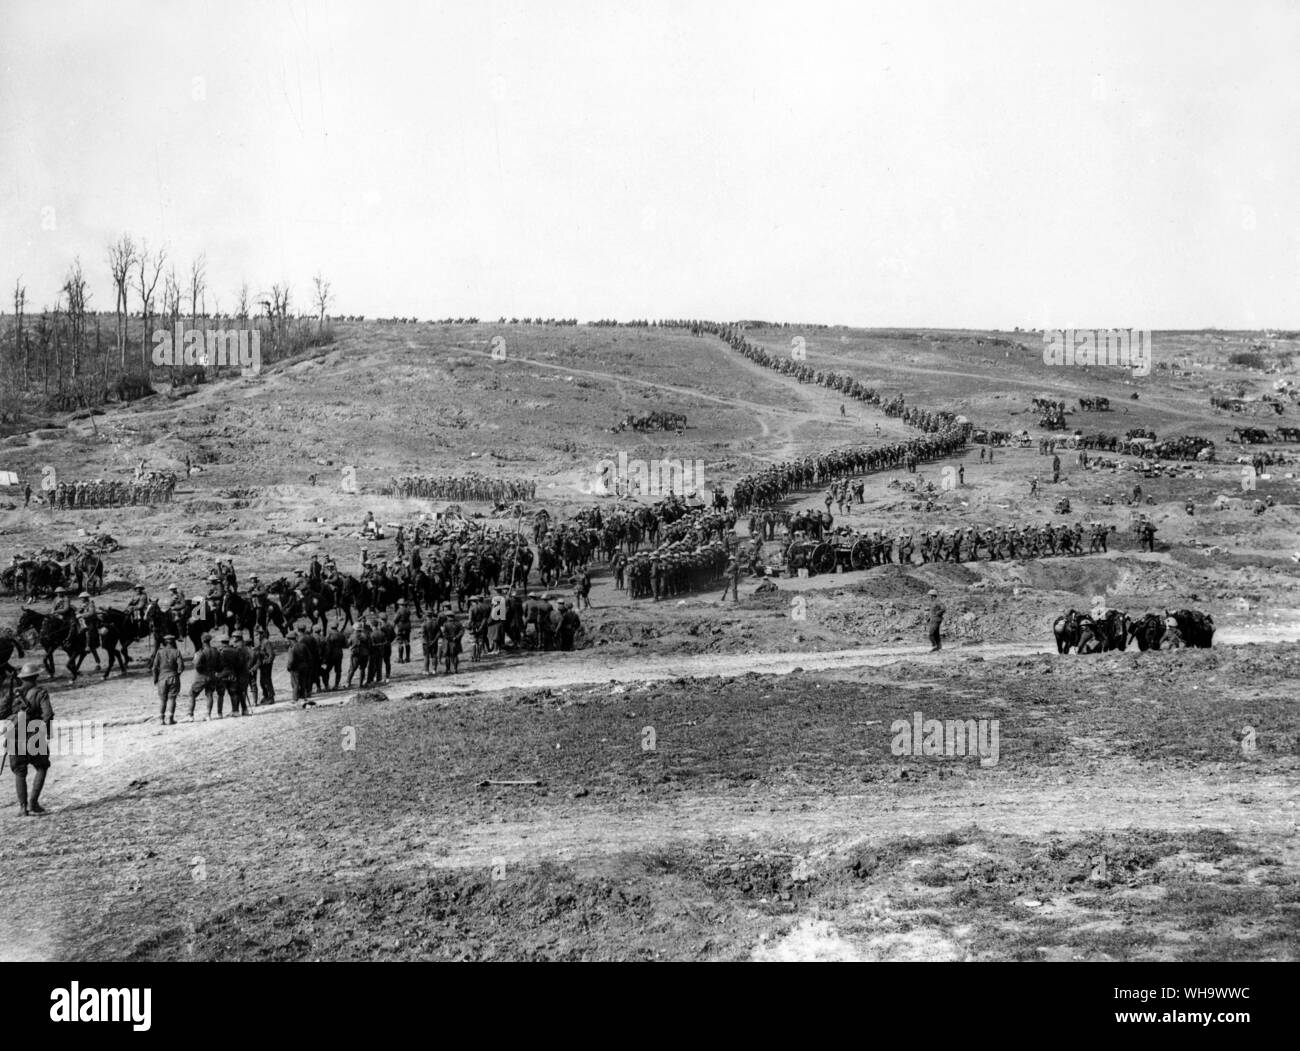 France, WW1: Battle of Flers - Courcelette. Queen's Bayson on the march approaching Hardecourt Wood, Sept. 1916. Stock Photo